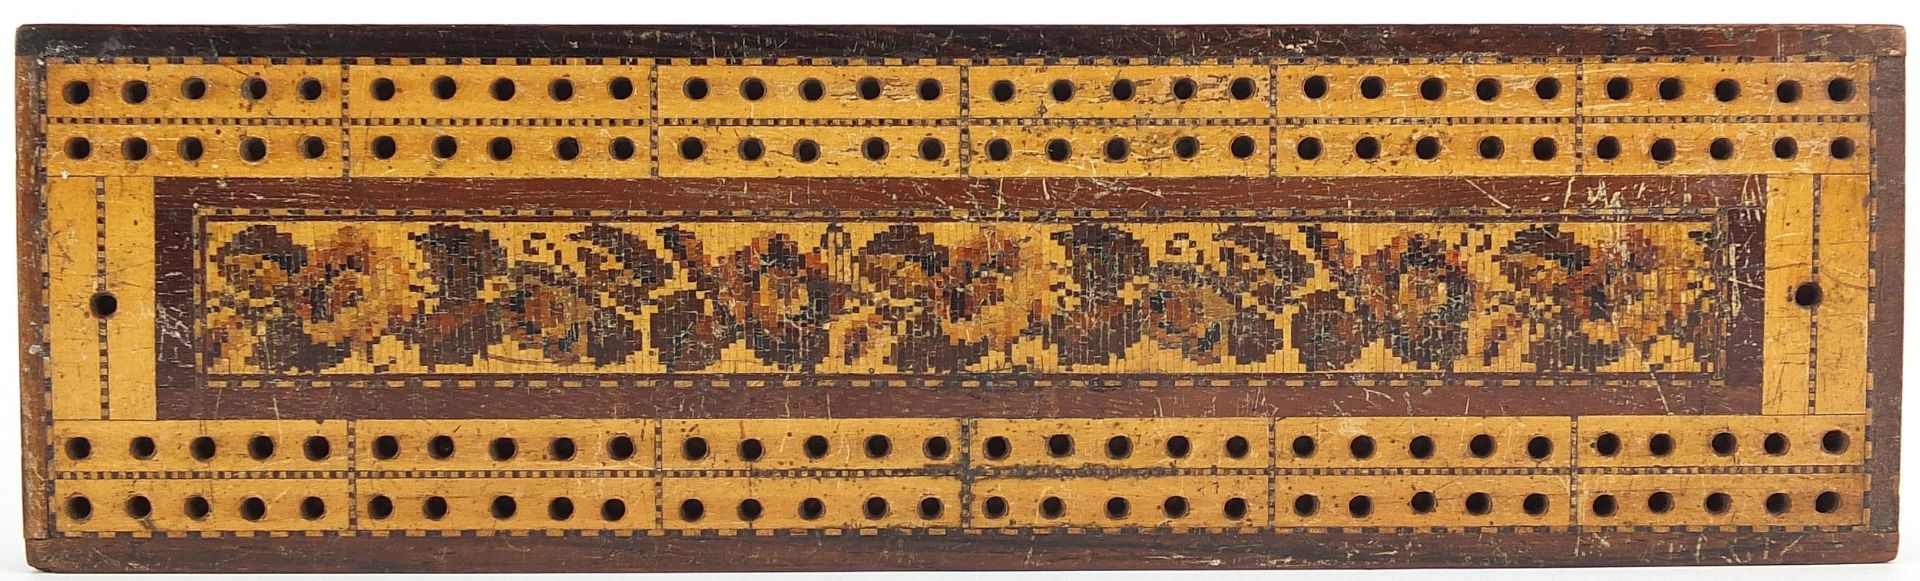 Victorian Tunbridge Ware cribbage board with floral inlay, 25cm x 7cm : For further information on - Image 2 of 4